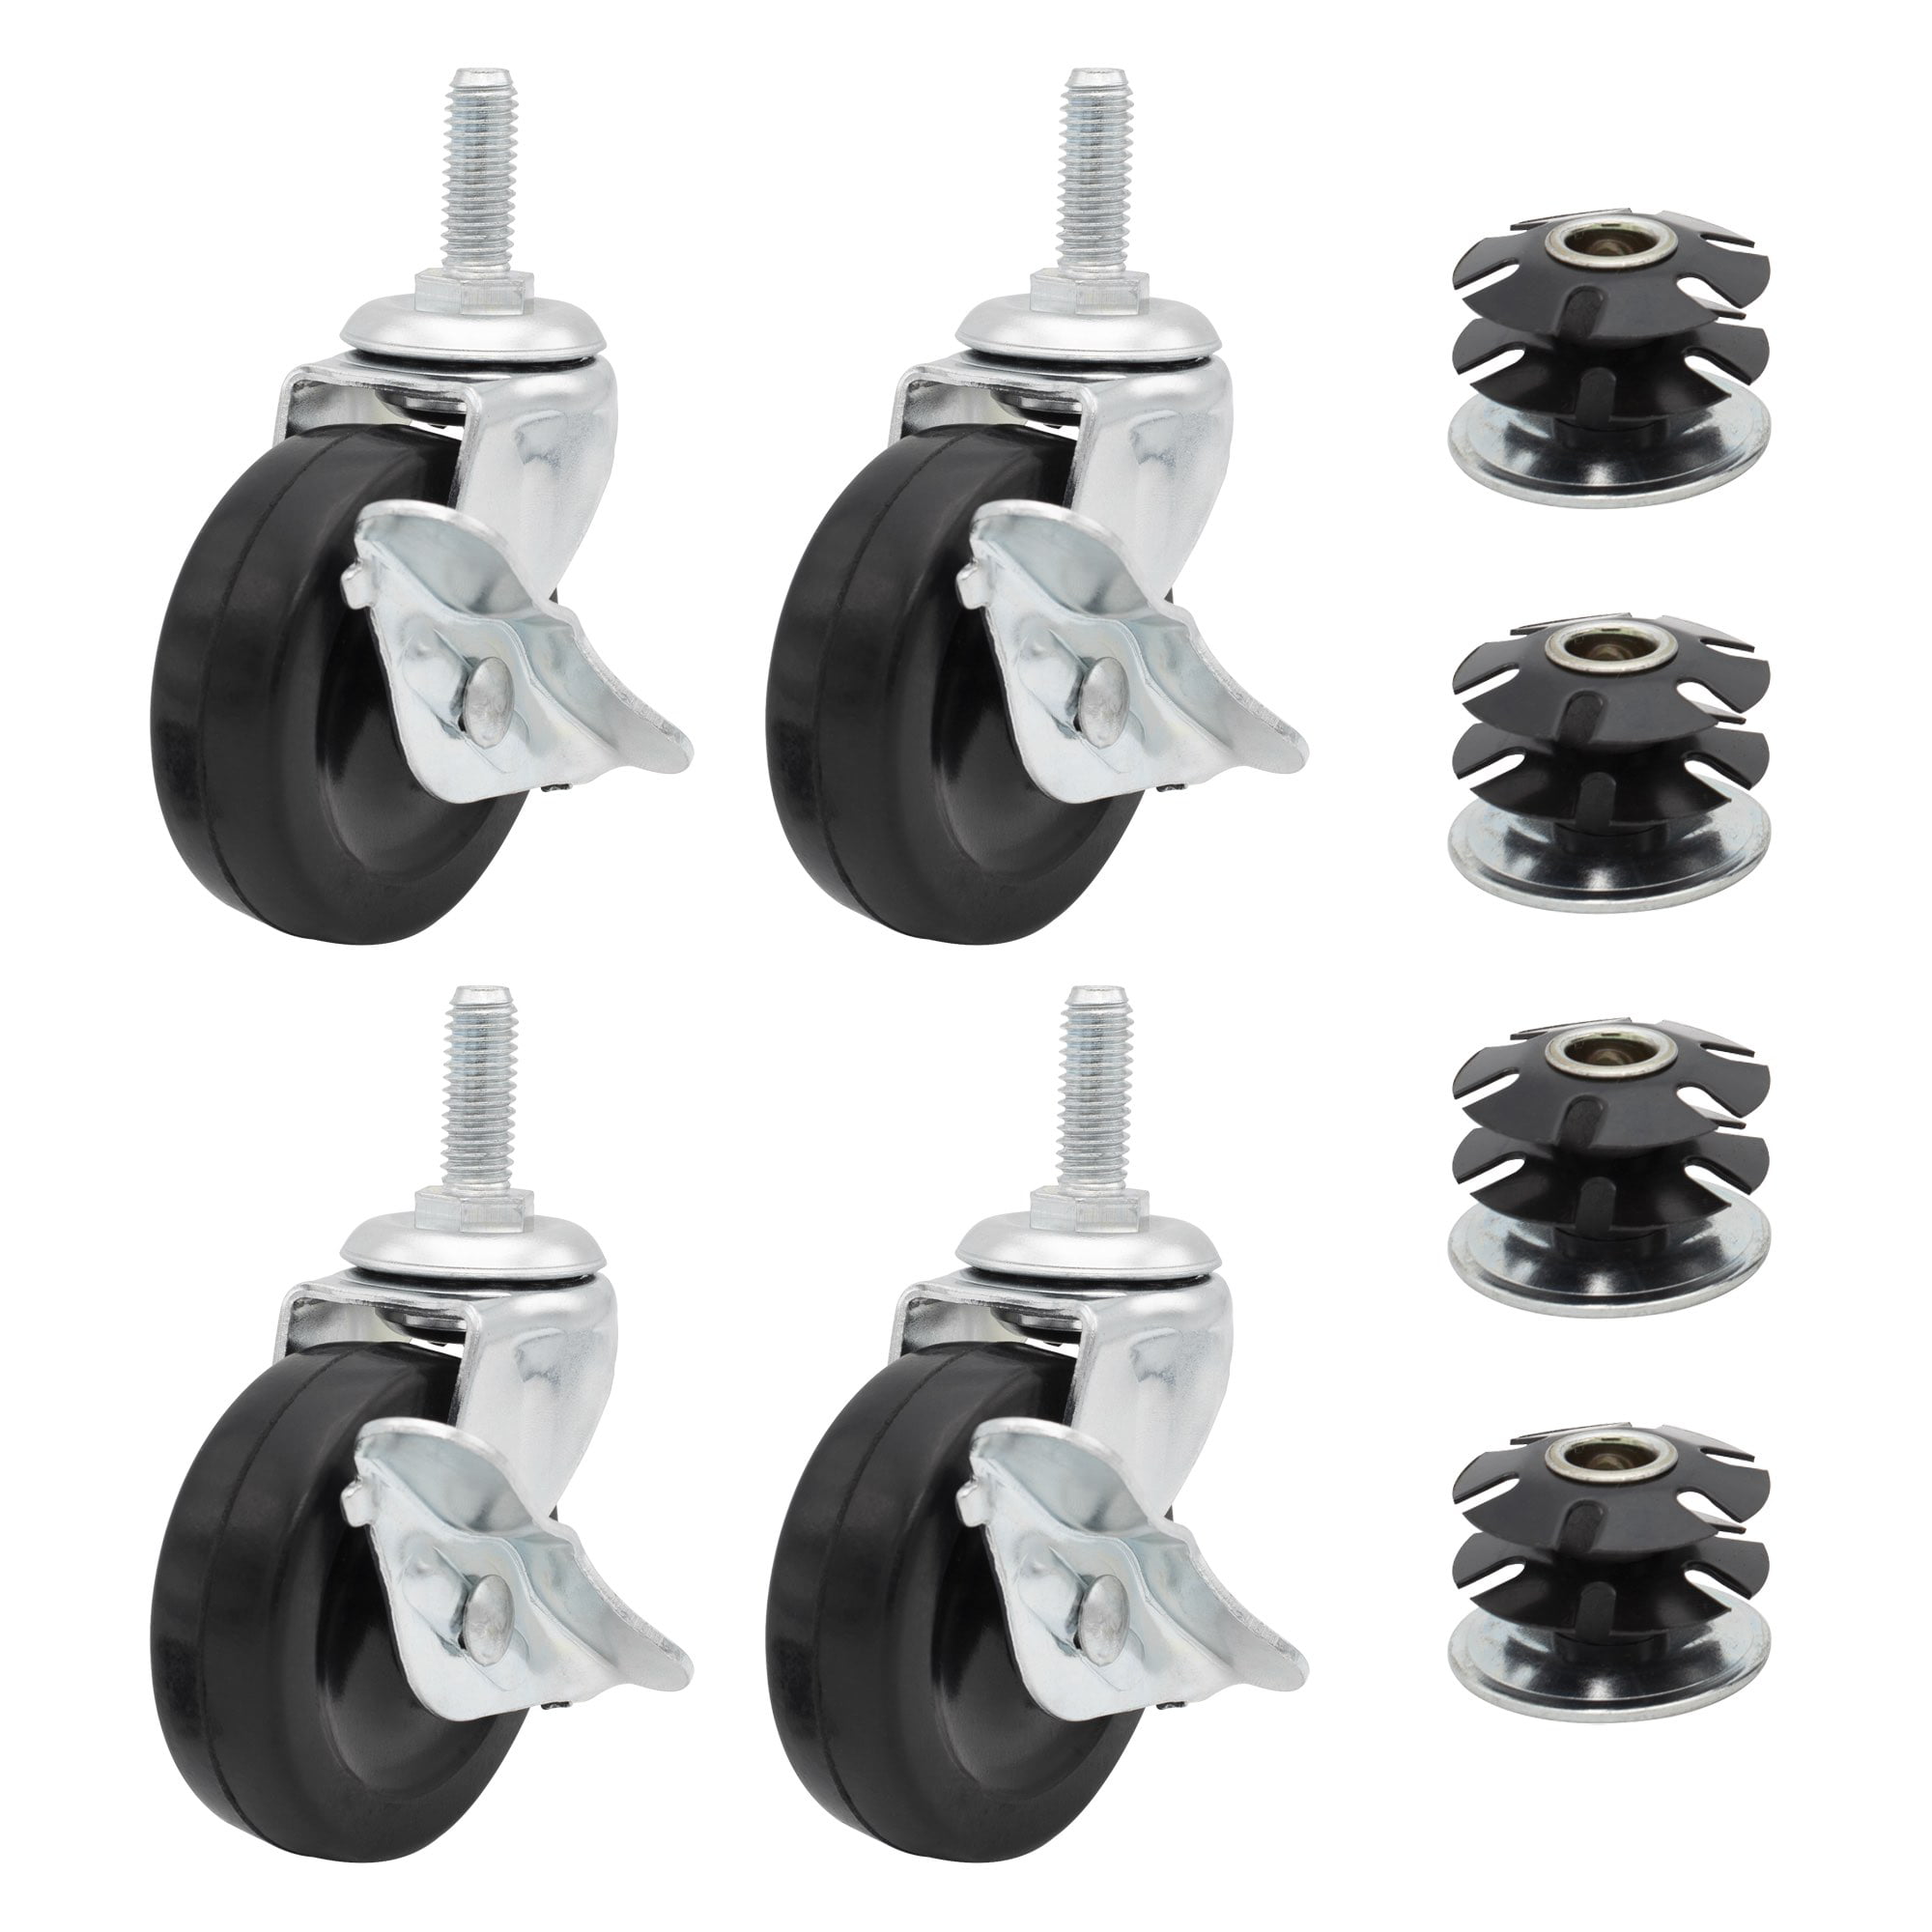 Unknown1 3/4 Round Double Star Caster Inserts 1-1/2 Gray Swivel Non Hooded Twin Wheel Furniture Casters 4 with Brakes 2 Black Nylon